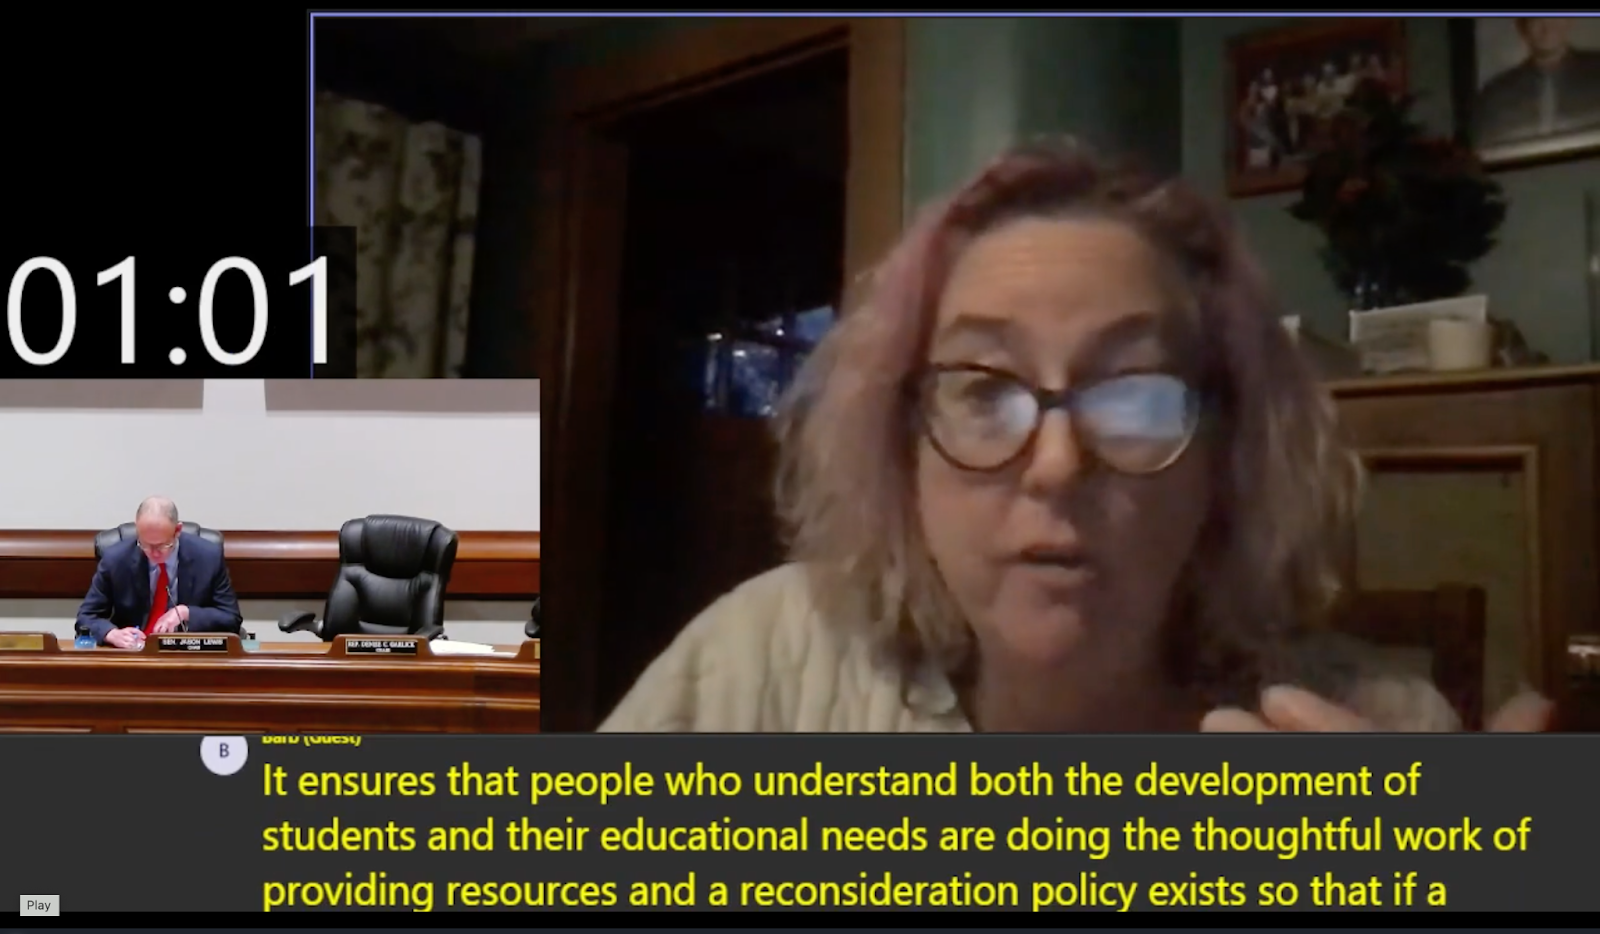 a still from the video of Barb giving testimony to the MA Legislature hearing; she is videoconferencing from what looks like her home, and there is a man (presumably a legislator) in an inset video window looking down at notes; captioning says, "It ensures that people who understand both the development of students and their educational needs are doing the thoughtful work of providing resources and a reconsideration policy exists so that if a"